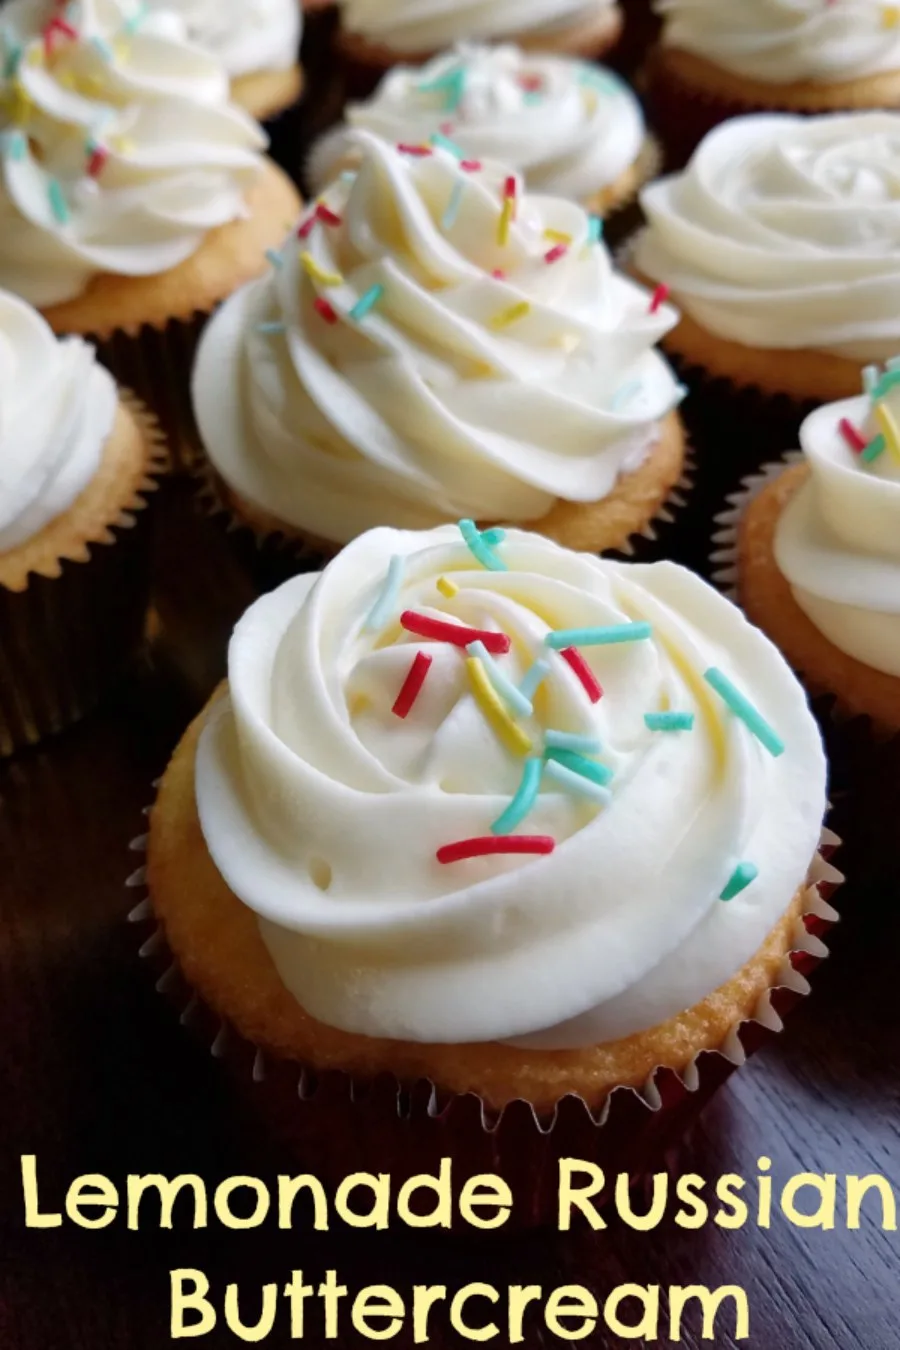 This silky smooth Russian buttercream is made with sweetened condensed milk and flavored with lemonade. Pipe some on lemon cupcakes for an luscious lemon treat!